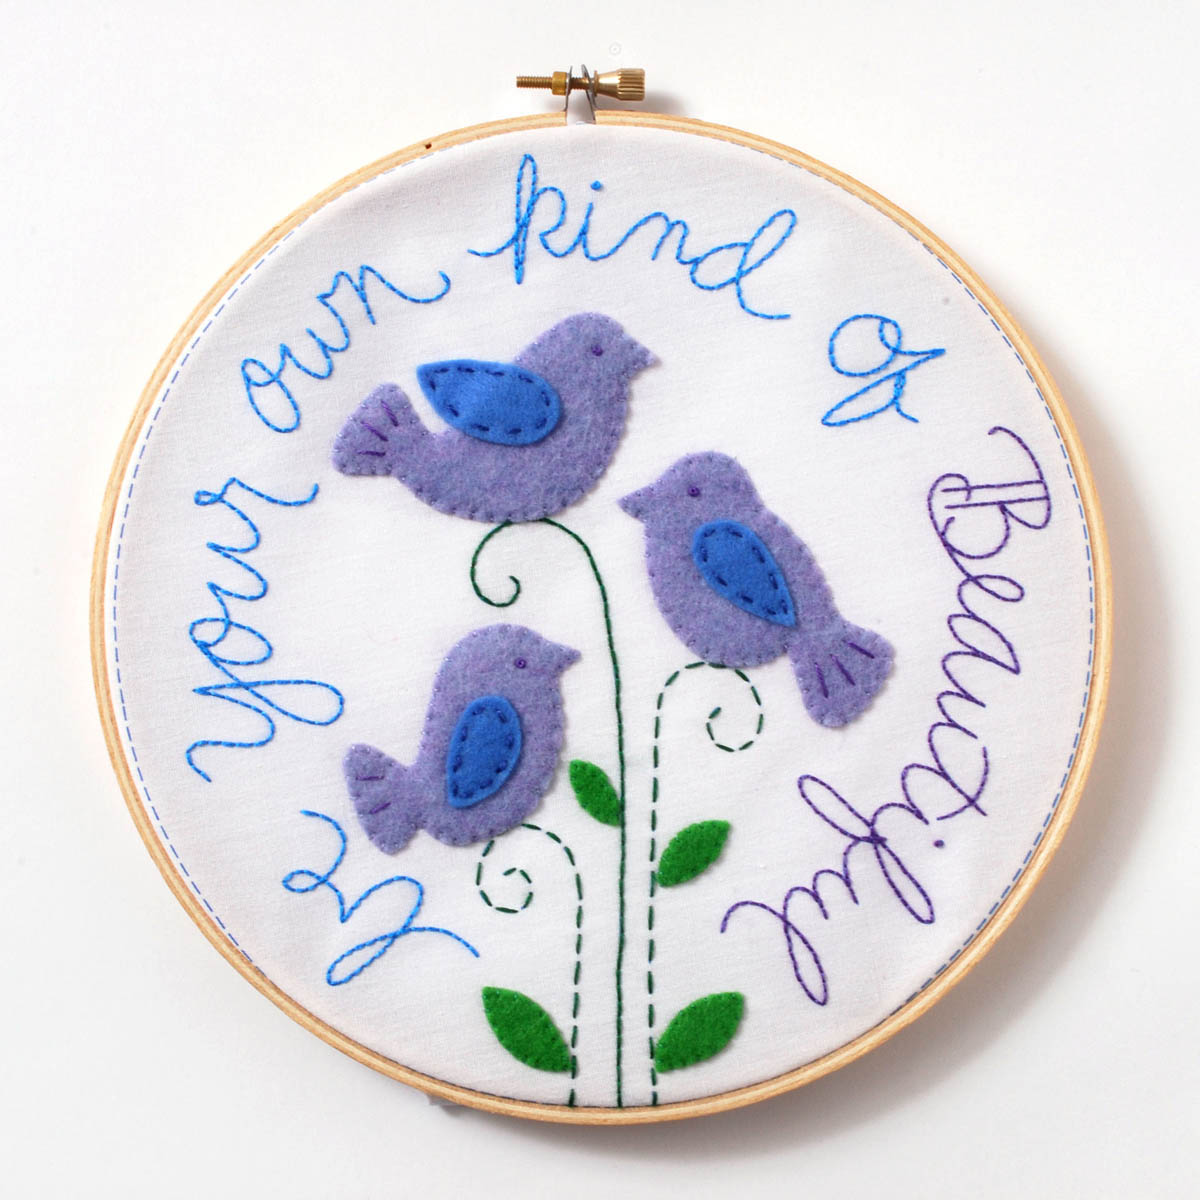 Bucilla ® Stamped Embroidery - Be Your Own Kind - 46238